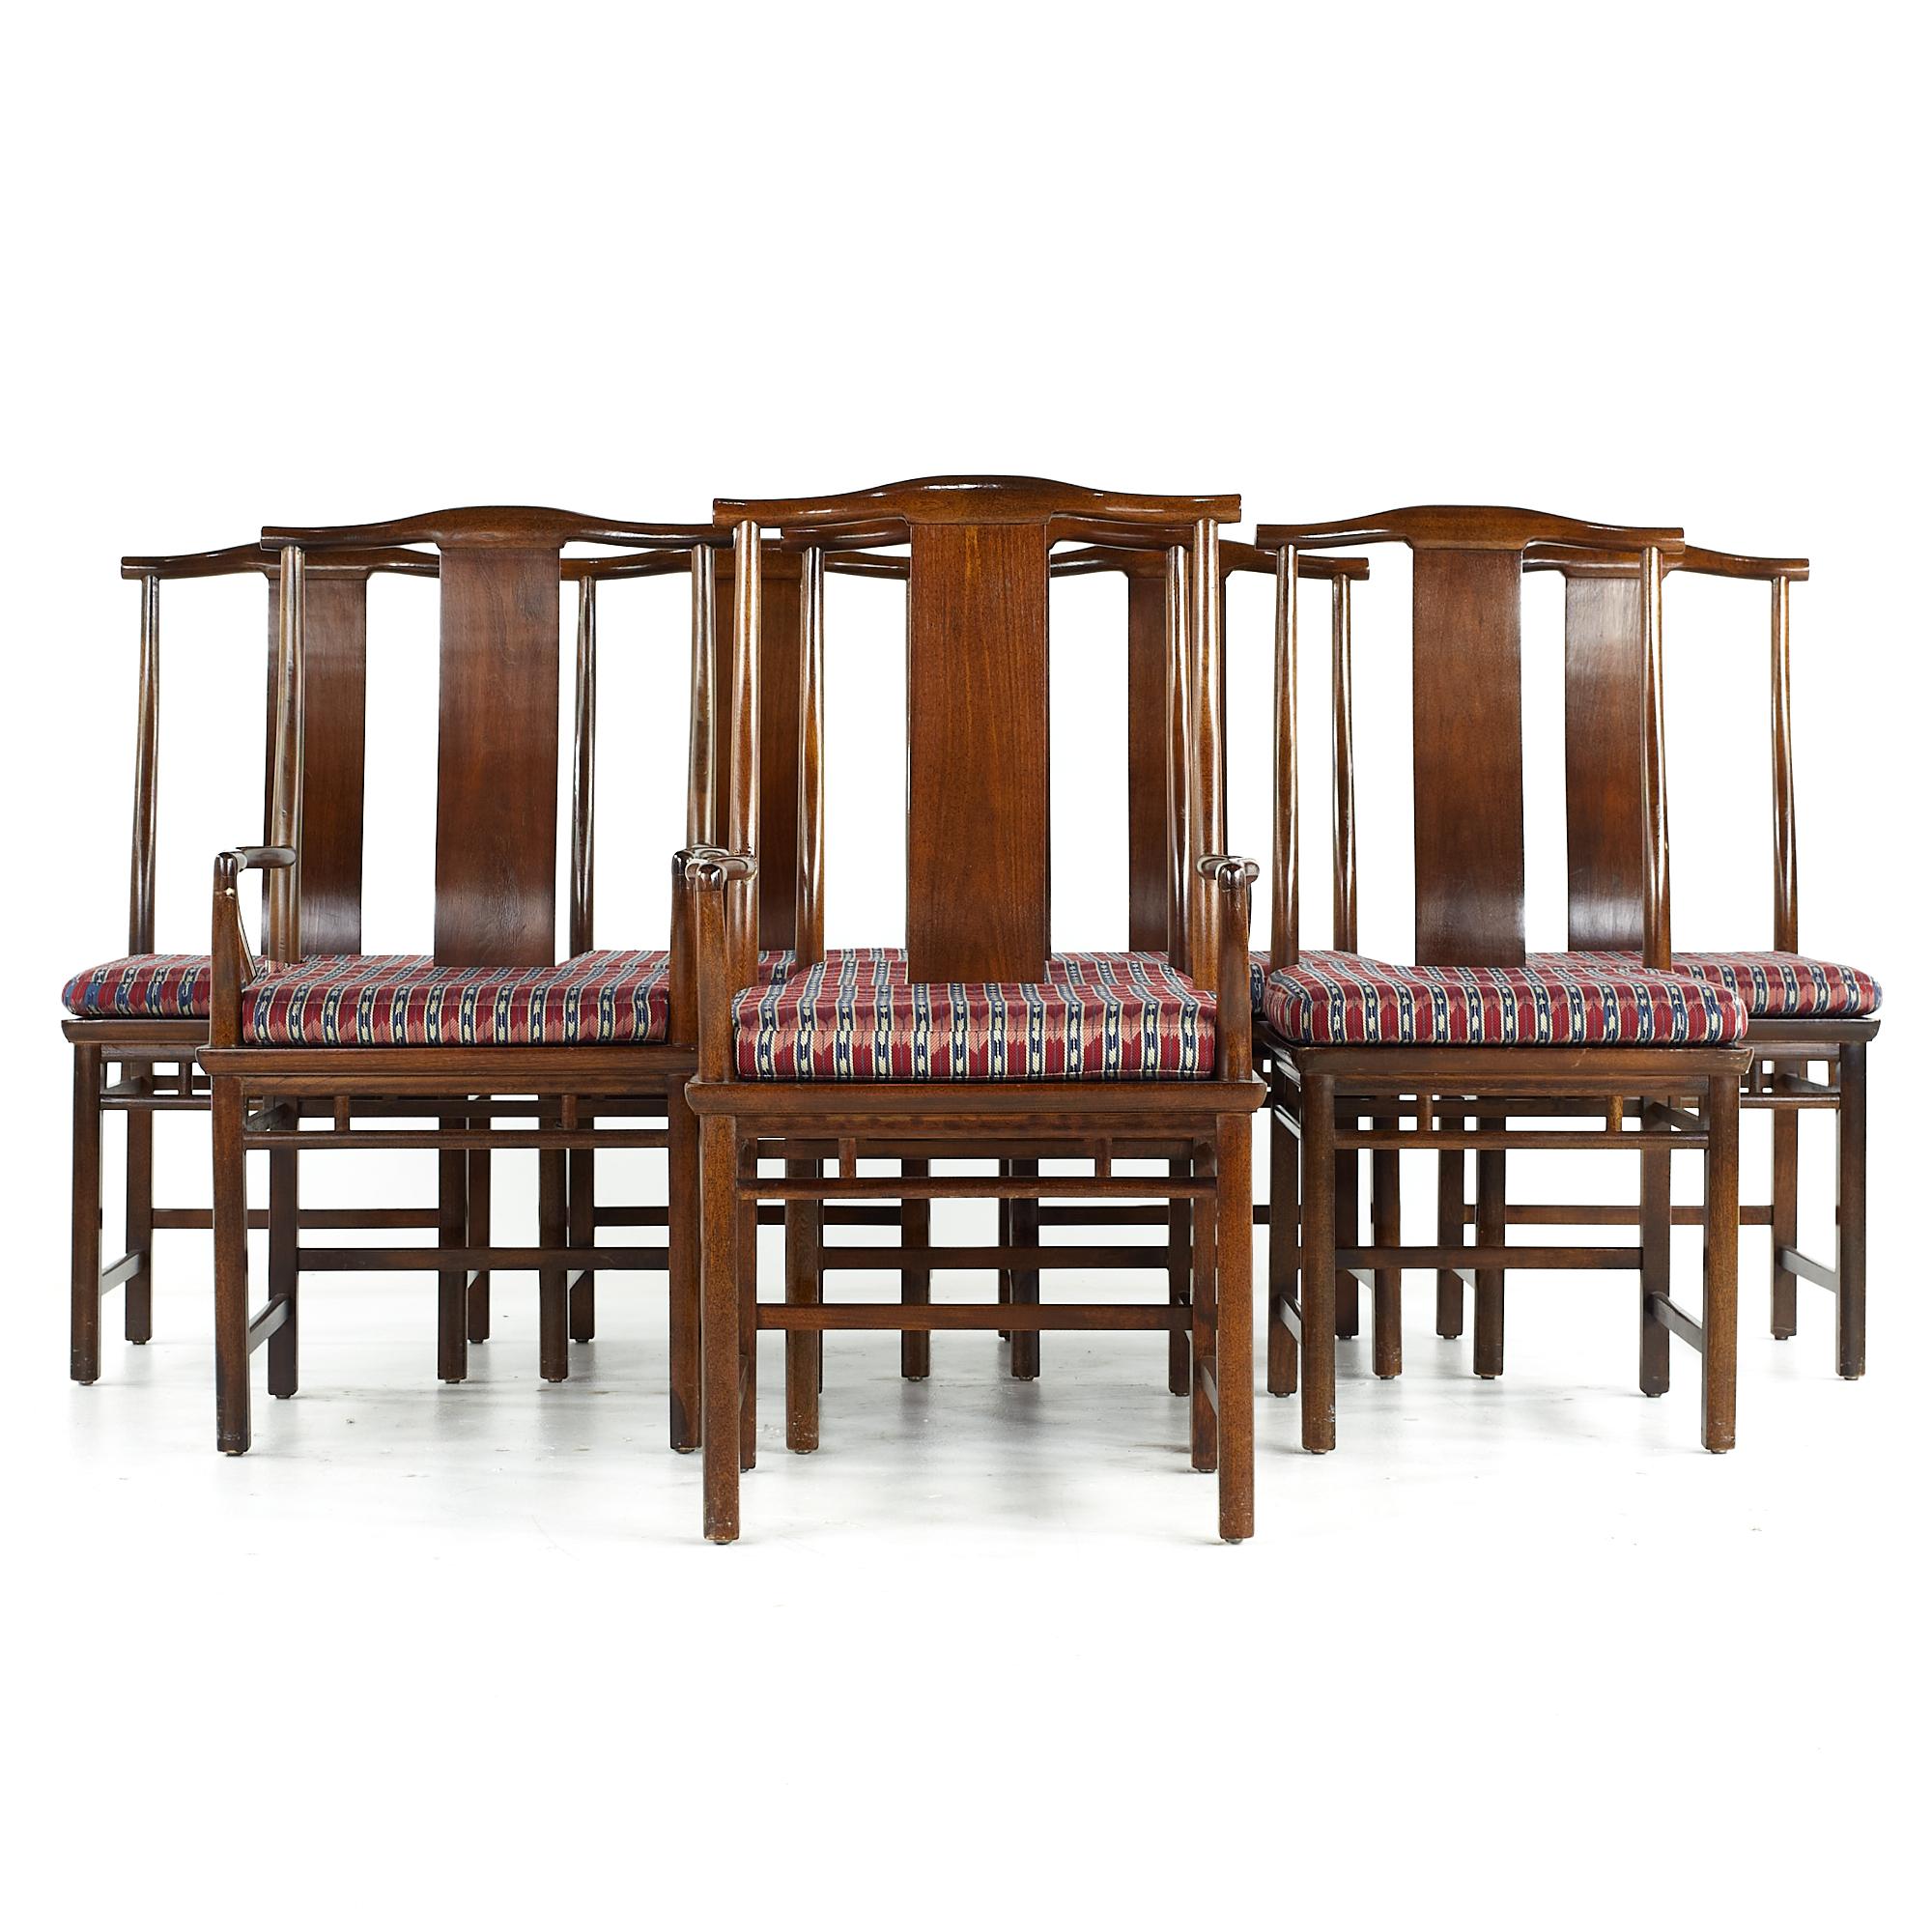 Michael Taylor for Baker midcentury Far East Dining Chairs - Set of 8

Each armless chair measures: 19.25 wide x 19 deep x 40 high, with a seat height of 19 inches
Each captains chair measures: 21.75 wide x 19 deep x 40 high, with a seat height